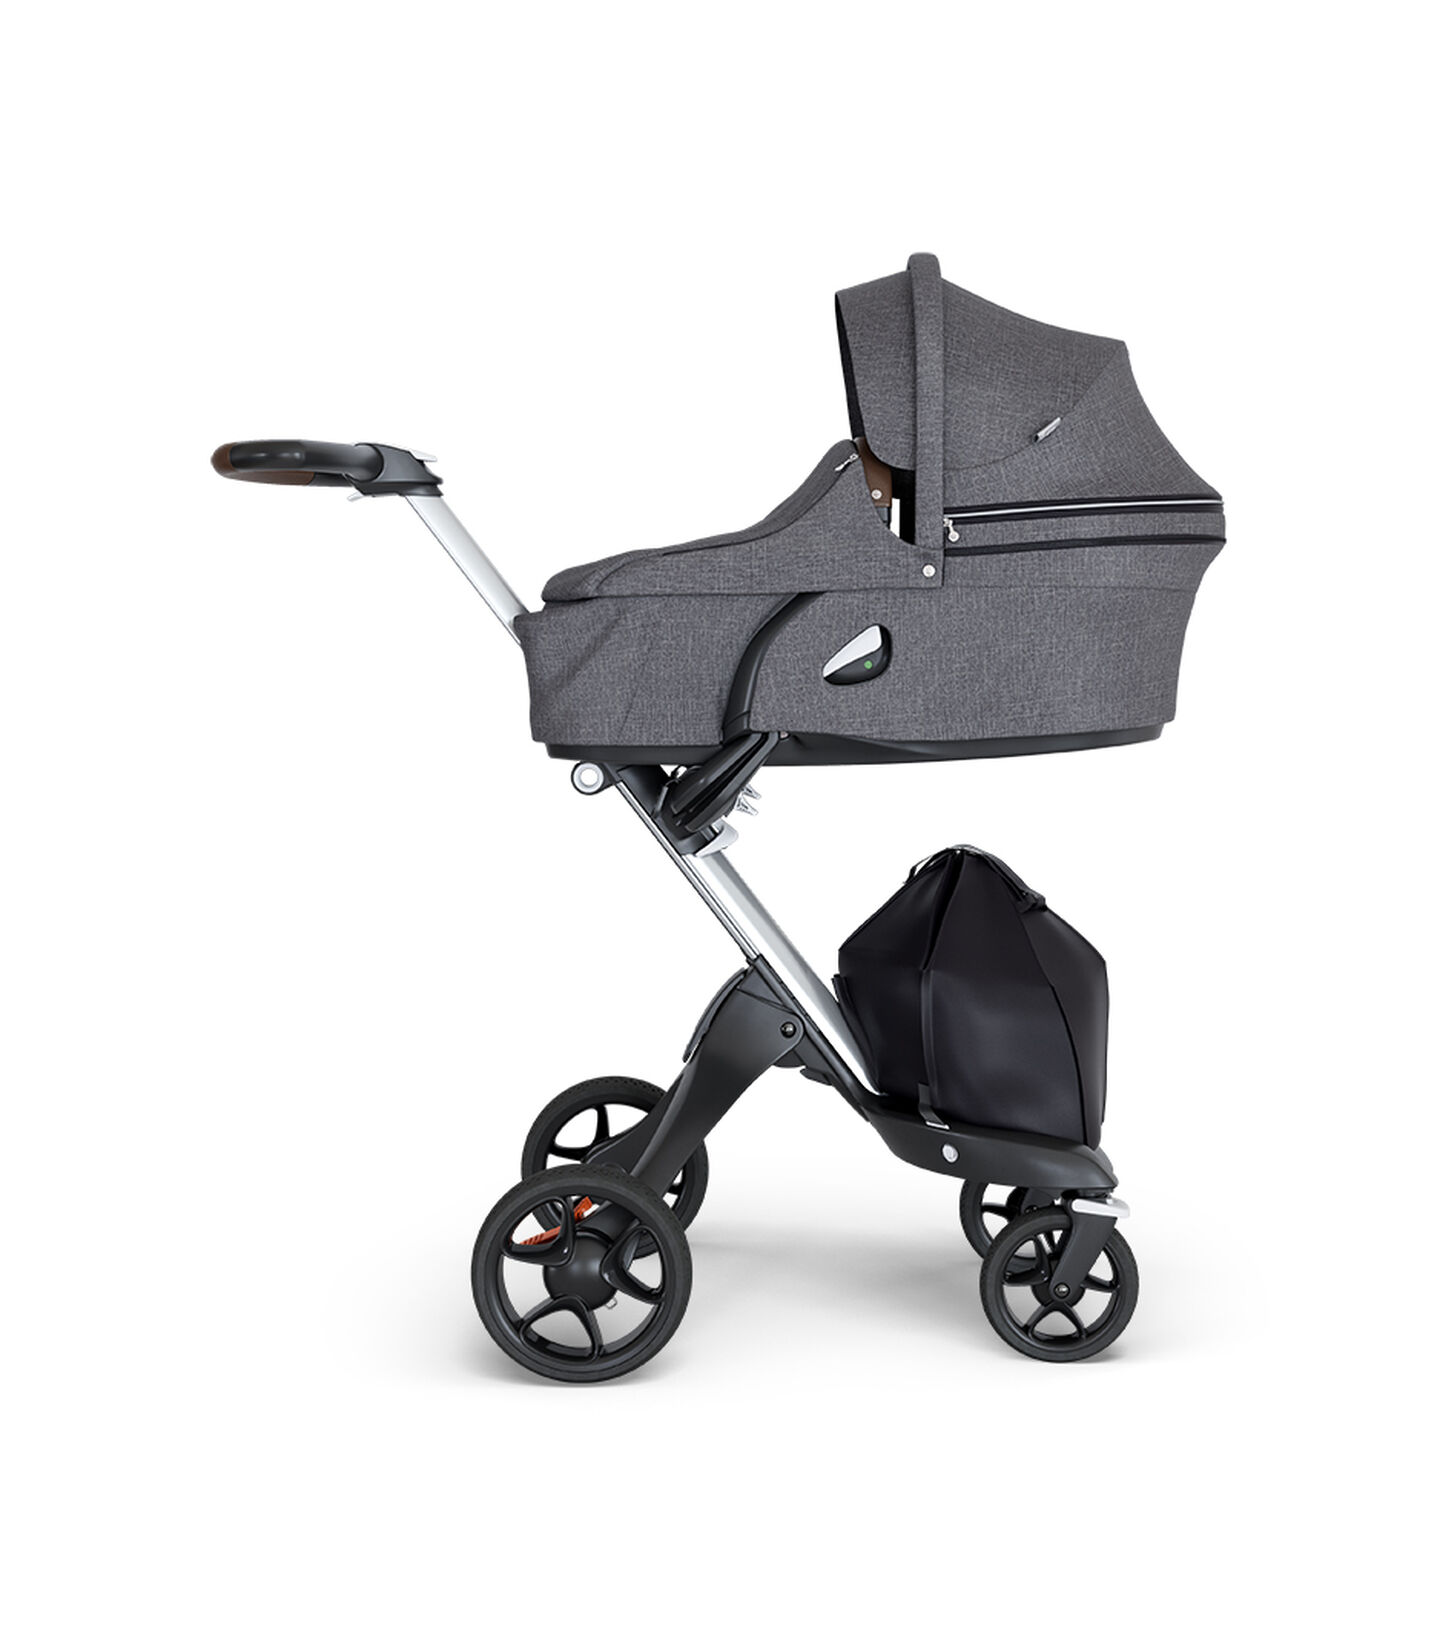 Stokke® Xplory® 6 Silver Chassis - Brown Handle Black Melange, 黑麻色, mainview view 2